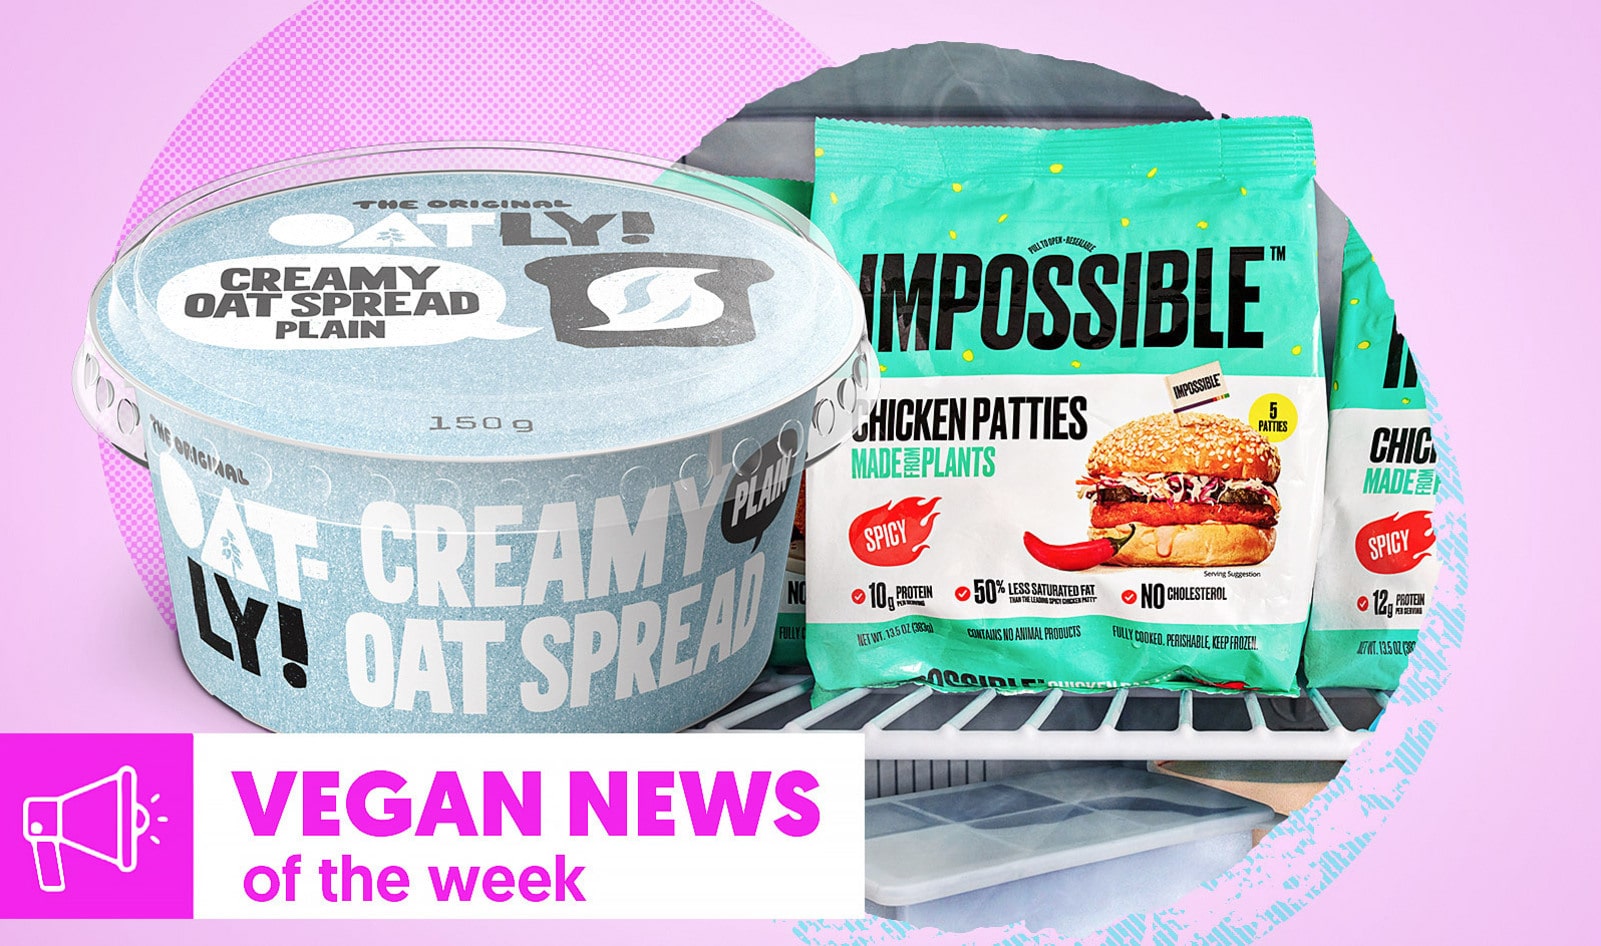 Spicy Impossible Chicken, Oatly's Cream Cheese, and More Vegan Food News of the Week